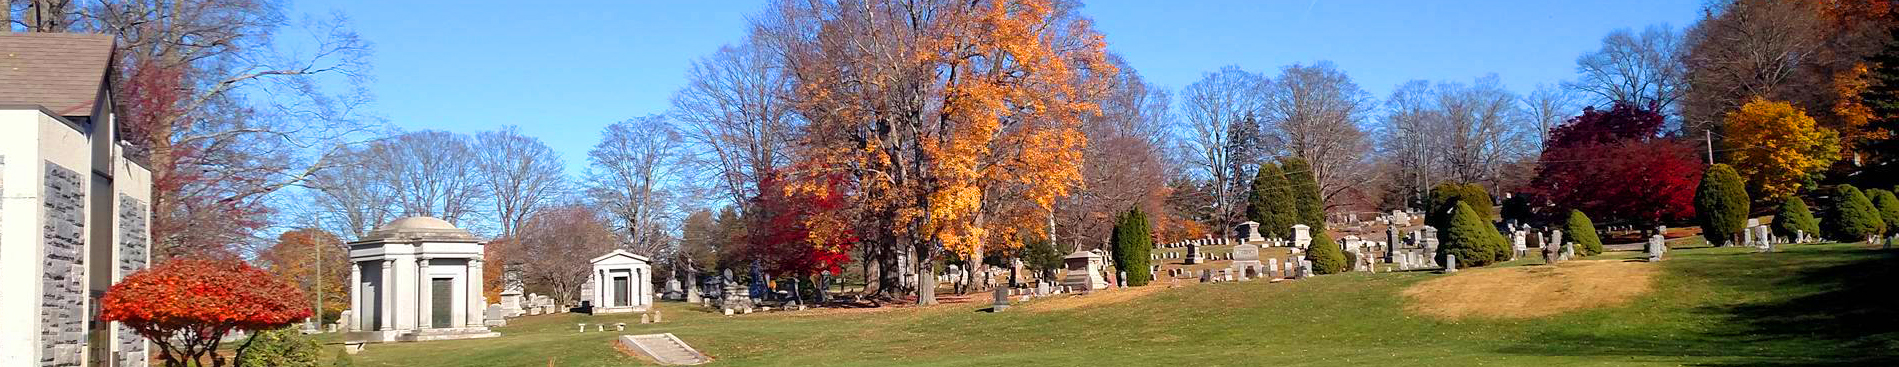 Cemetery in Westchester County